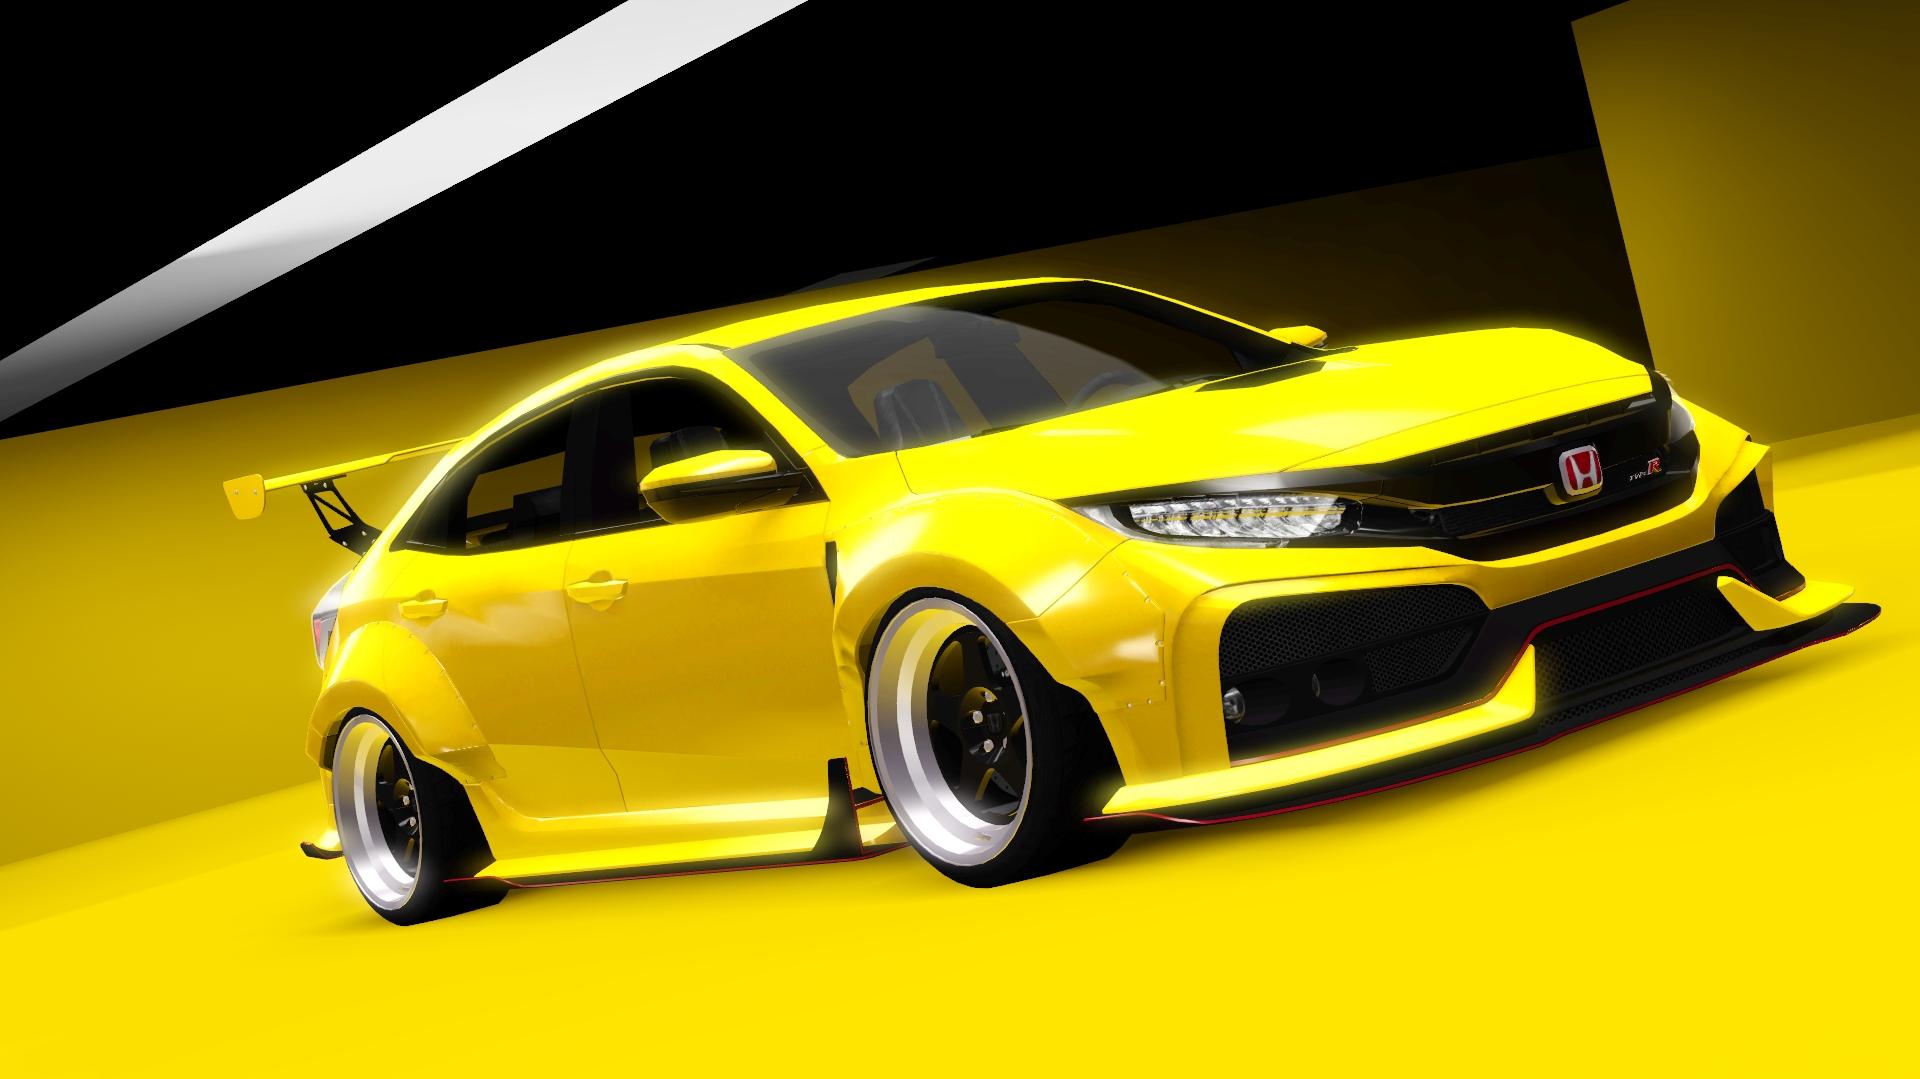 Fresh Prince Creations   The 2018 Honda Civic Type R Widebody is